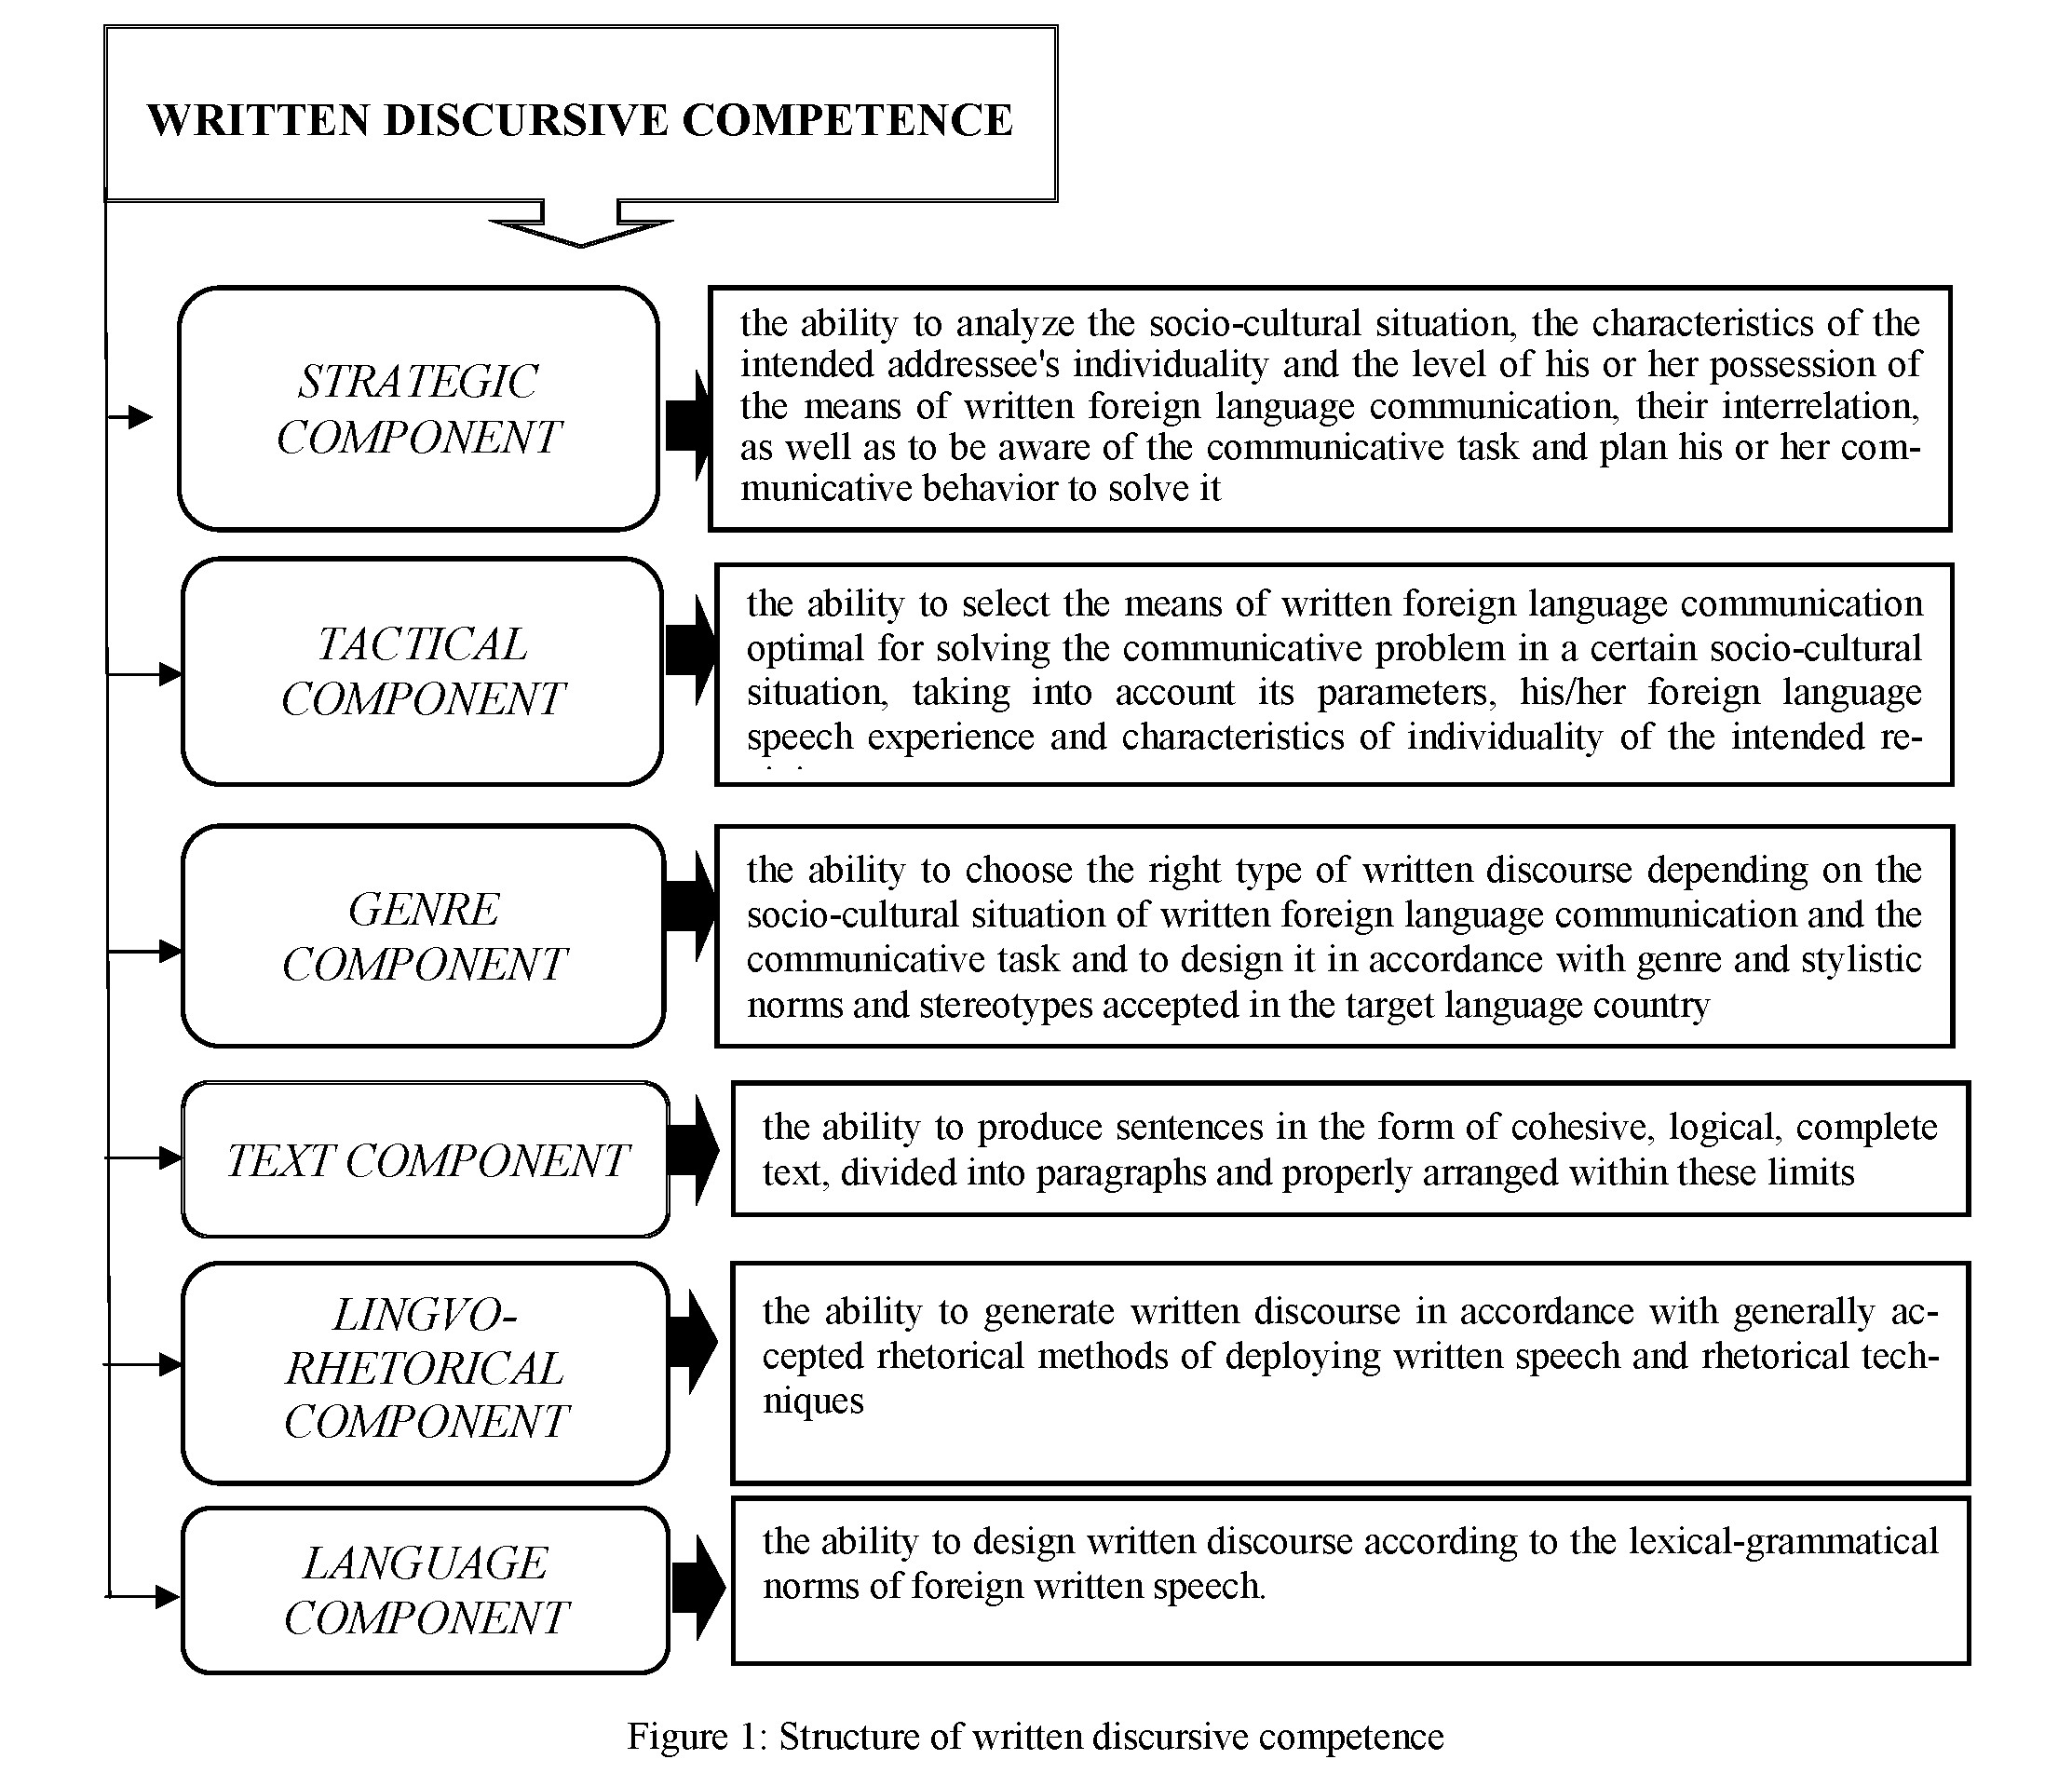 Written discursive competence as a component of the foreign-language communication competence of university students